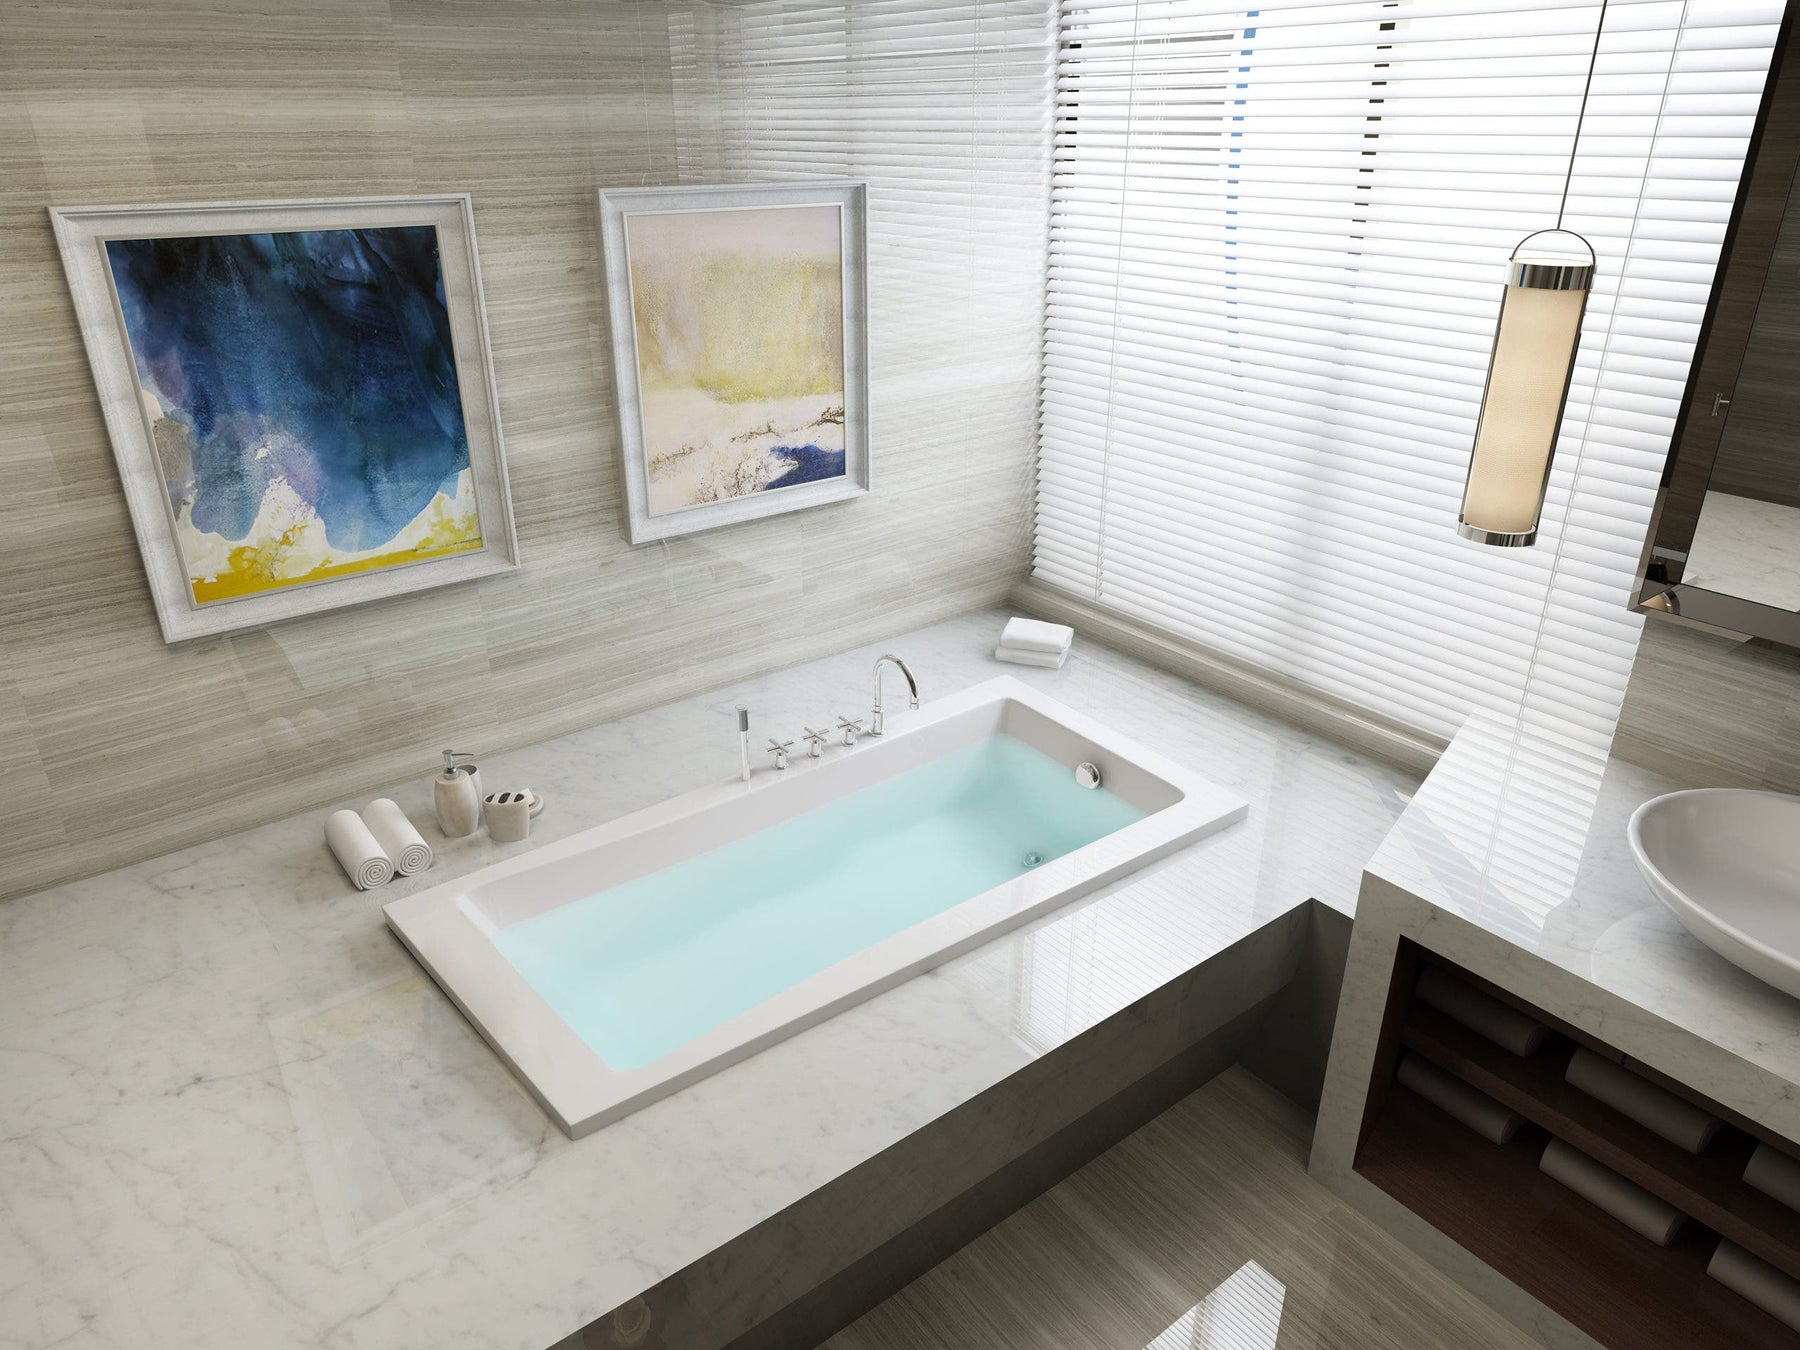 Envision Exceptional Contemporary Comfort with this Drop-In Acrylic Tub